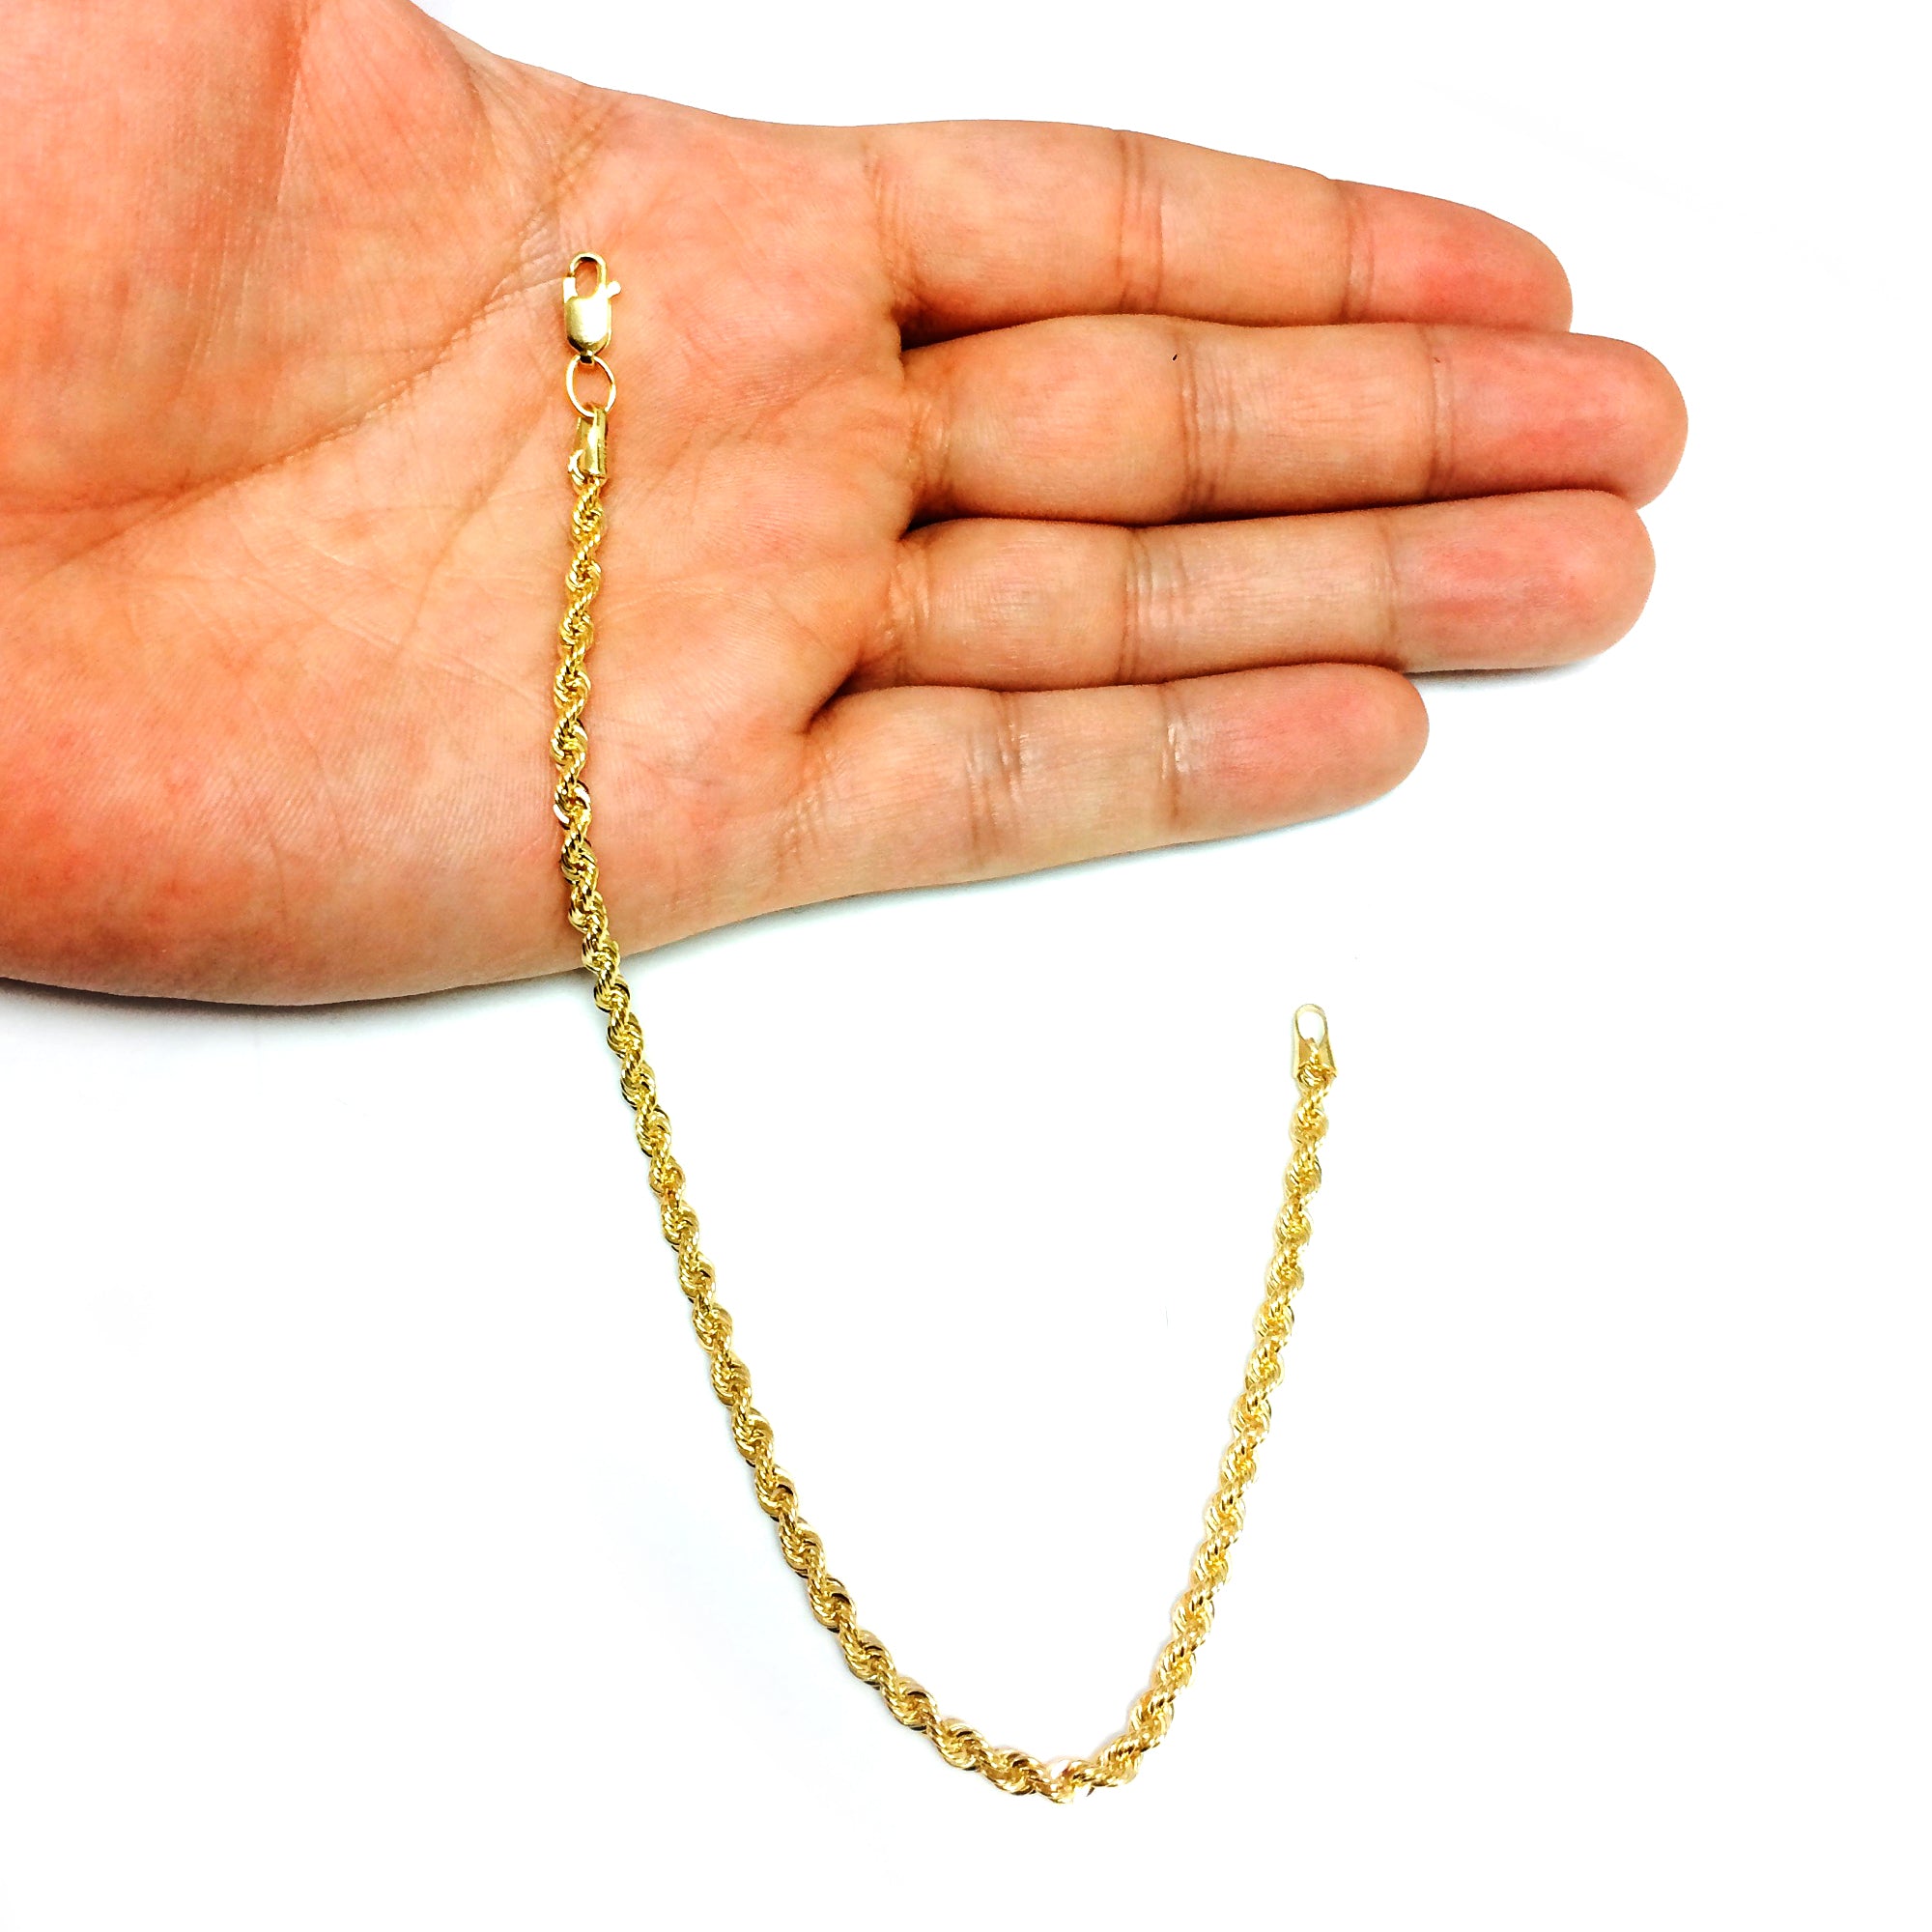 14K Yellow Gold Filled Solid Rope Chain Bracelet, 3.2mm, 8.5" fine designer jewelry for men and women